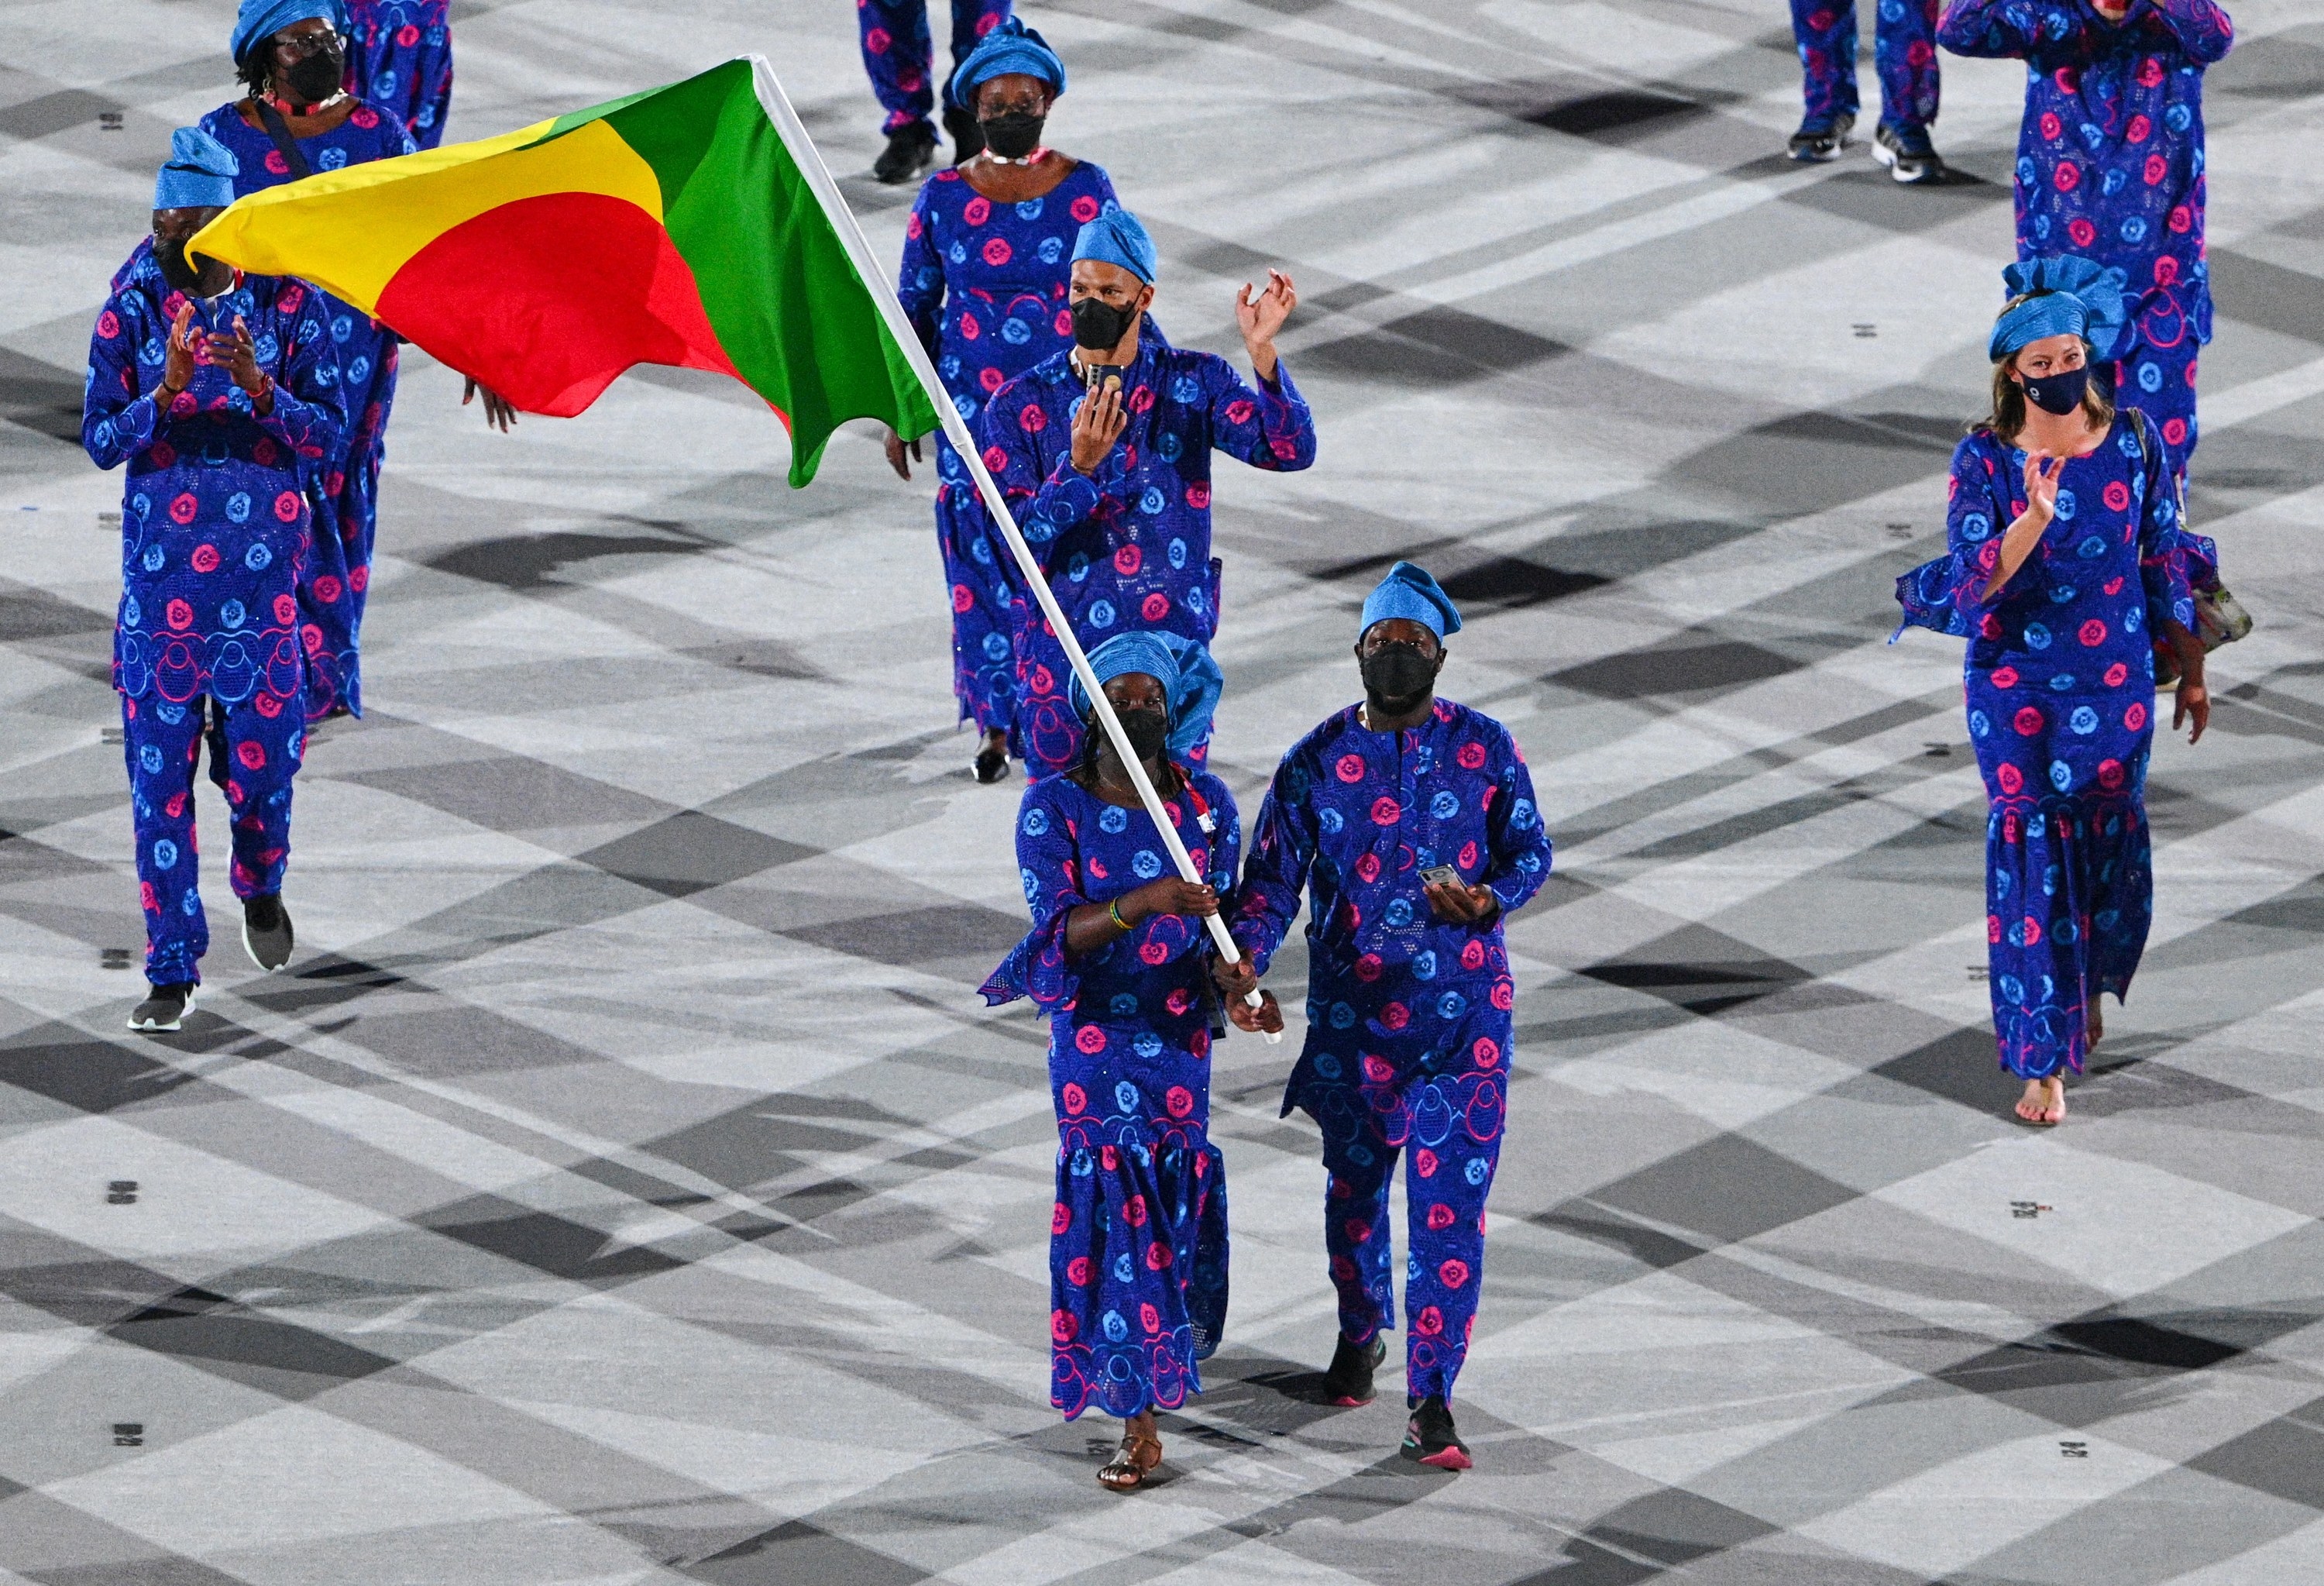 The athletes wore the traditional bomba